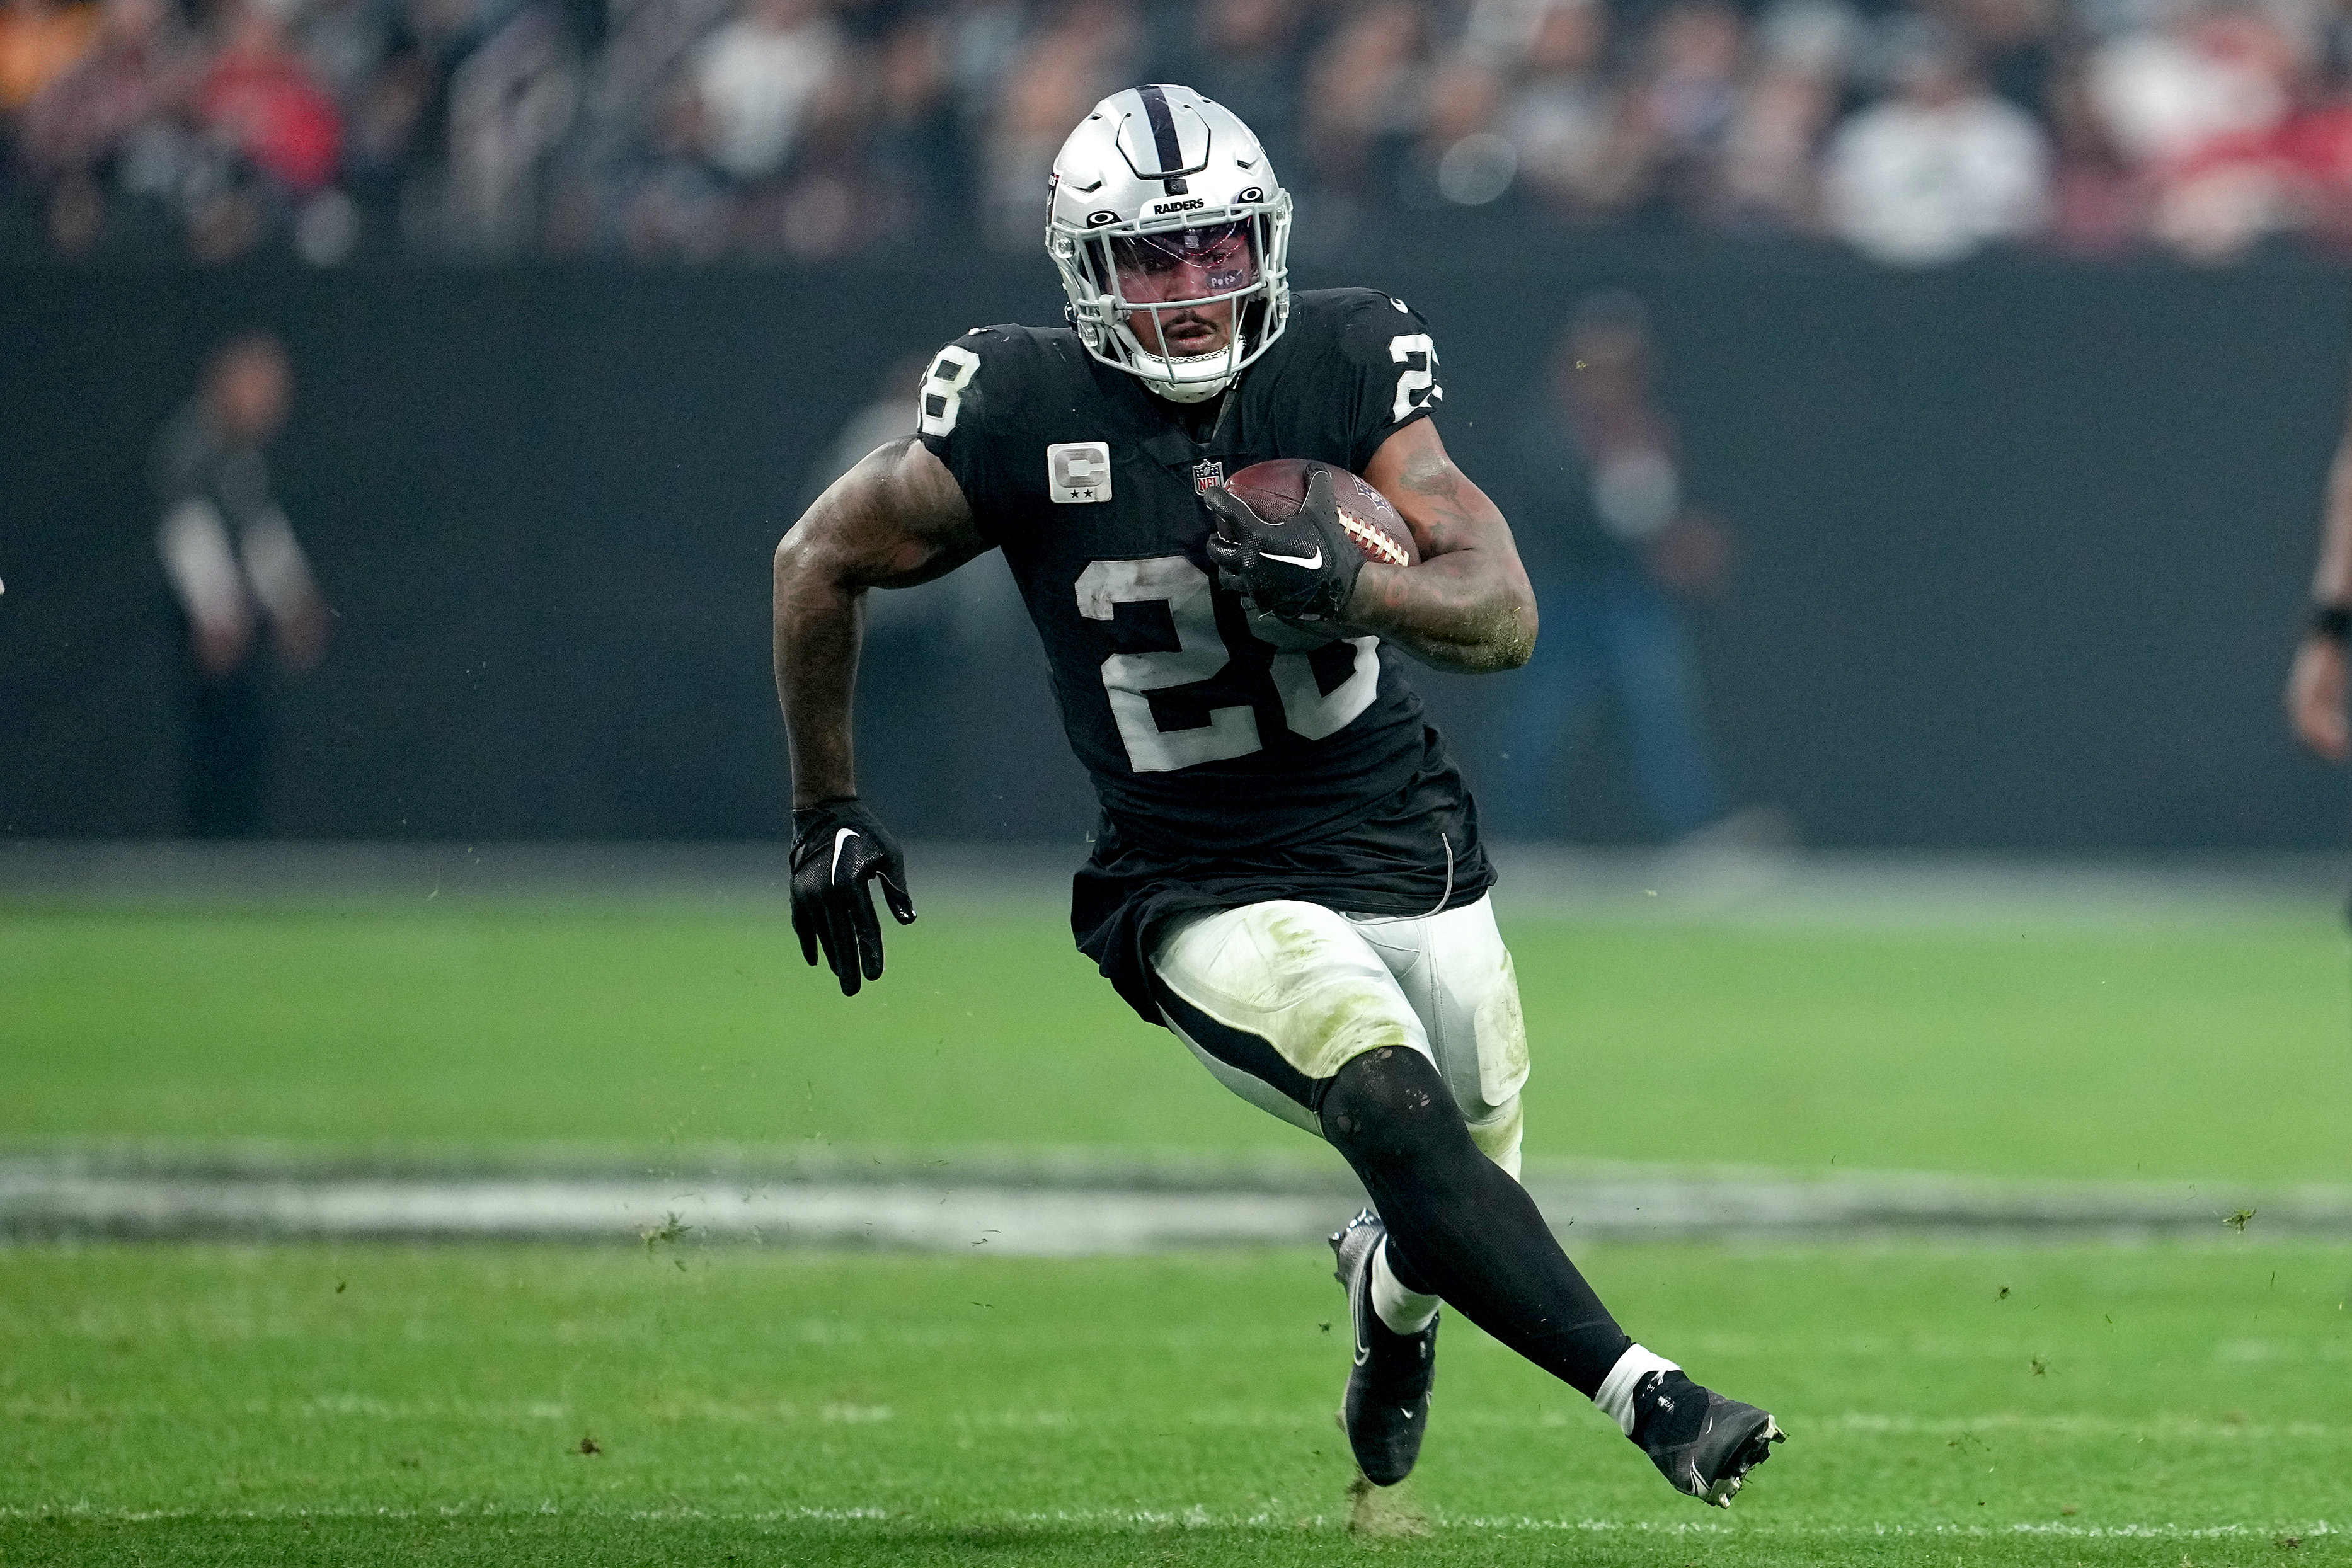 Running back Josh Jacobs of the Las Vegas Raiders carries the ball in the game against the Kansas City Chiefs at Allegiant Stadium in Las Vegas, Nevada, January 7, 2023. /CFP 